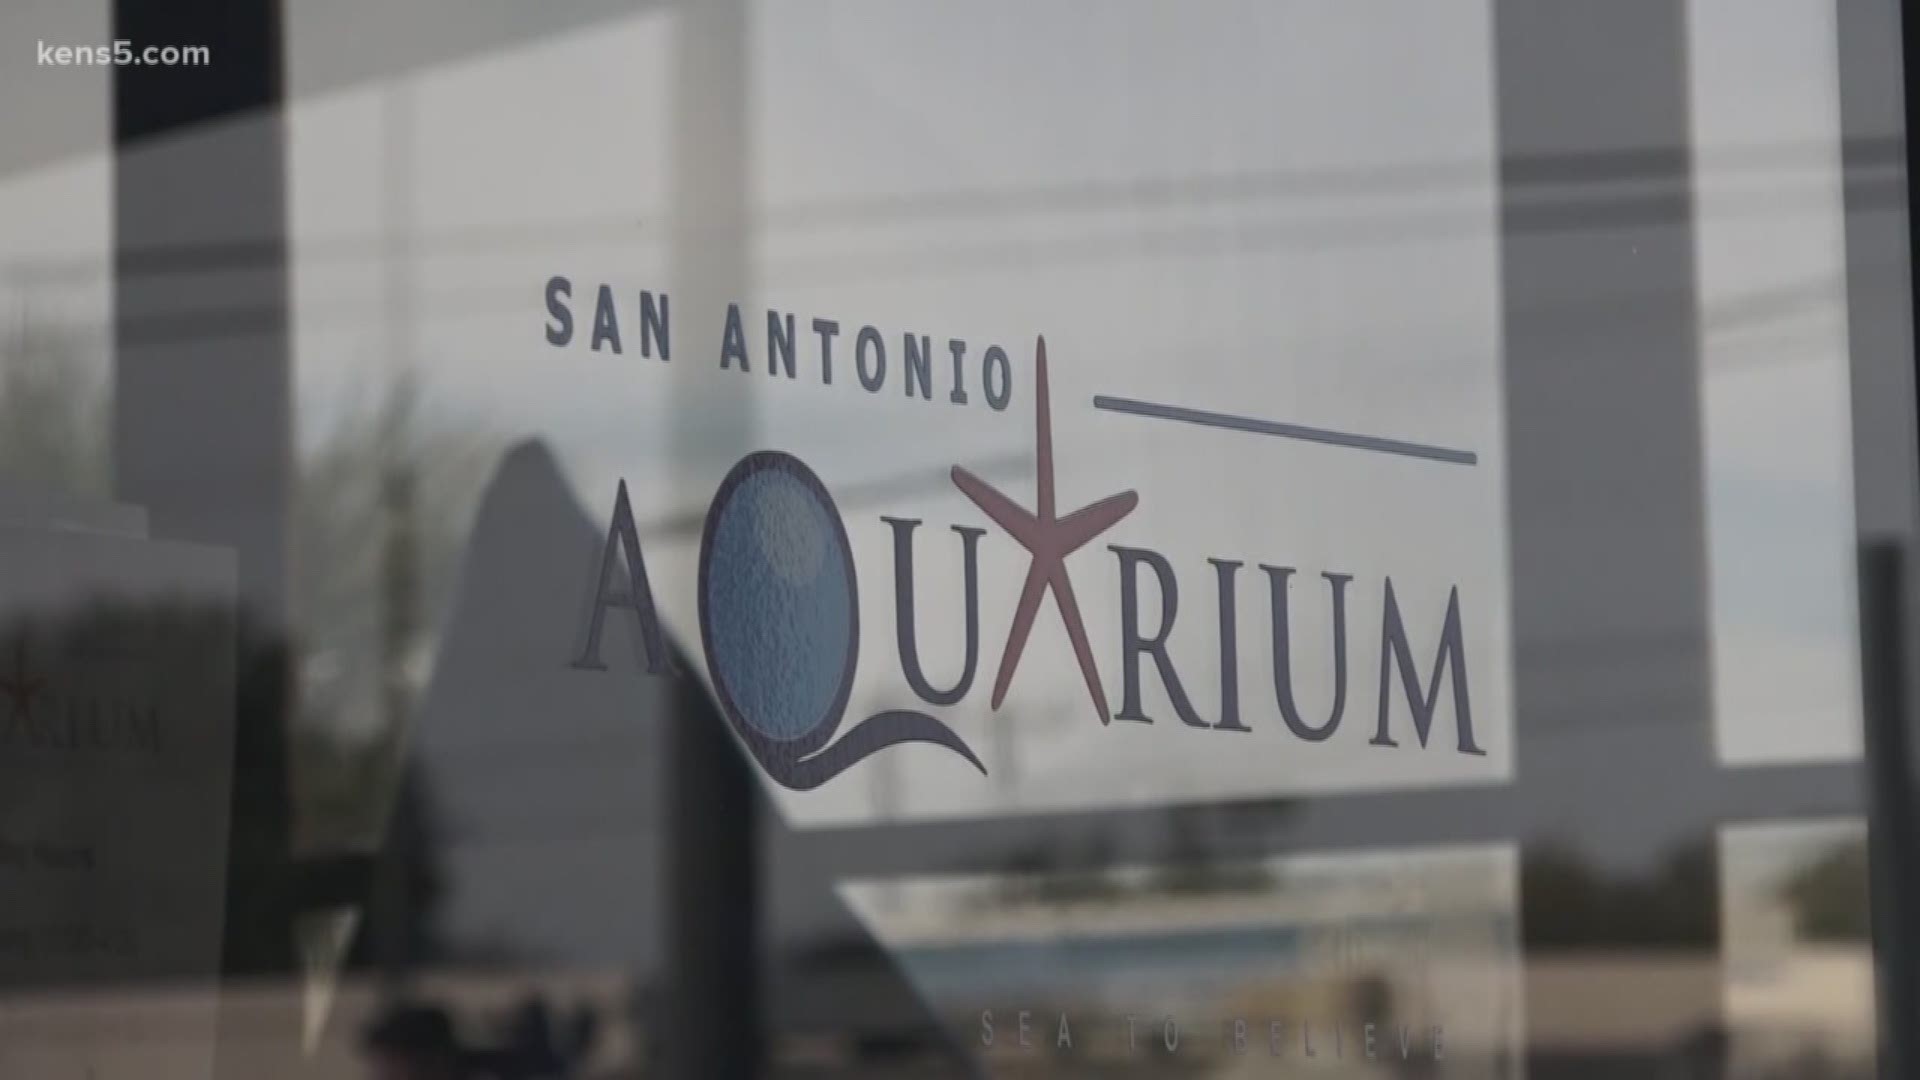 Over a week after the Leon Valley facility closed down due to code violations, the aquarium reopened to the public on Saturday.